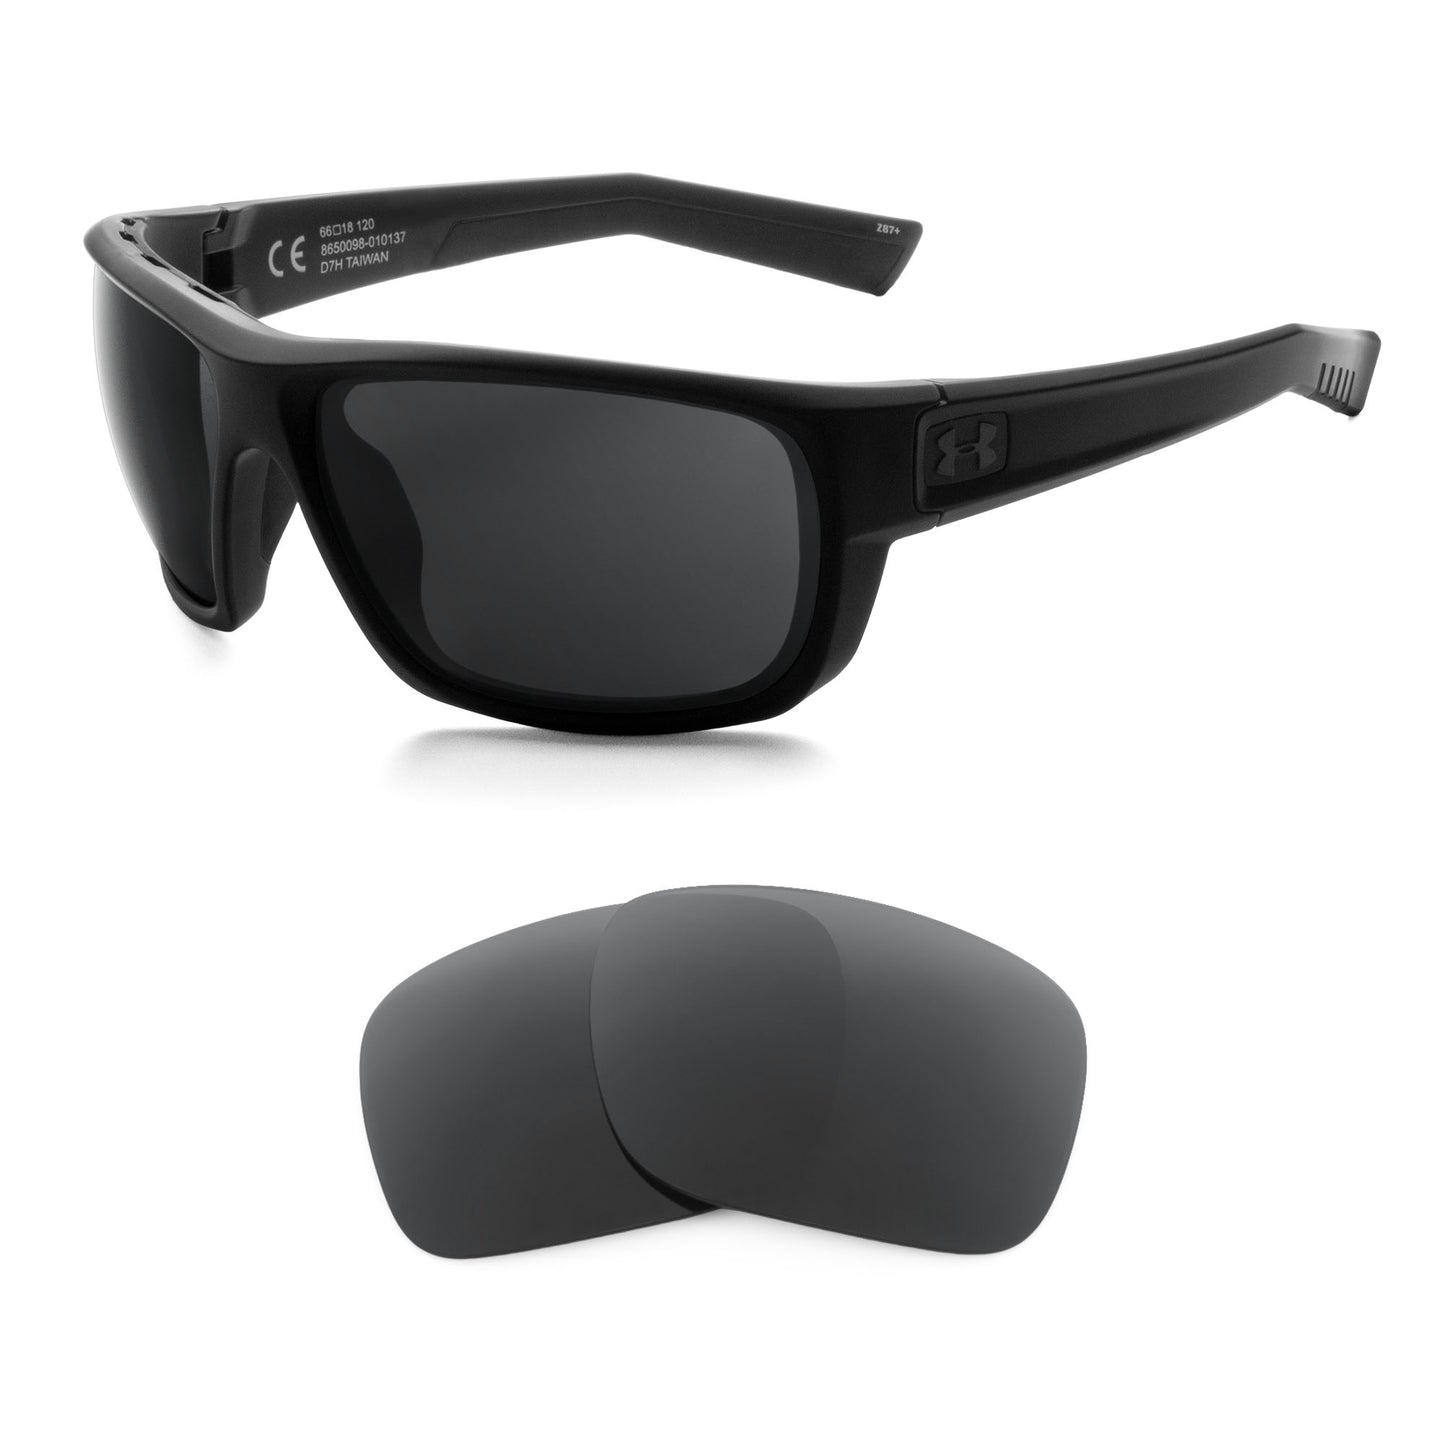 Under Armour Launch sunglasses with replacement lenses